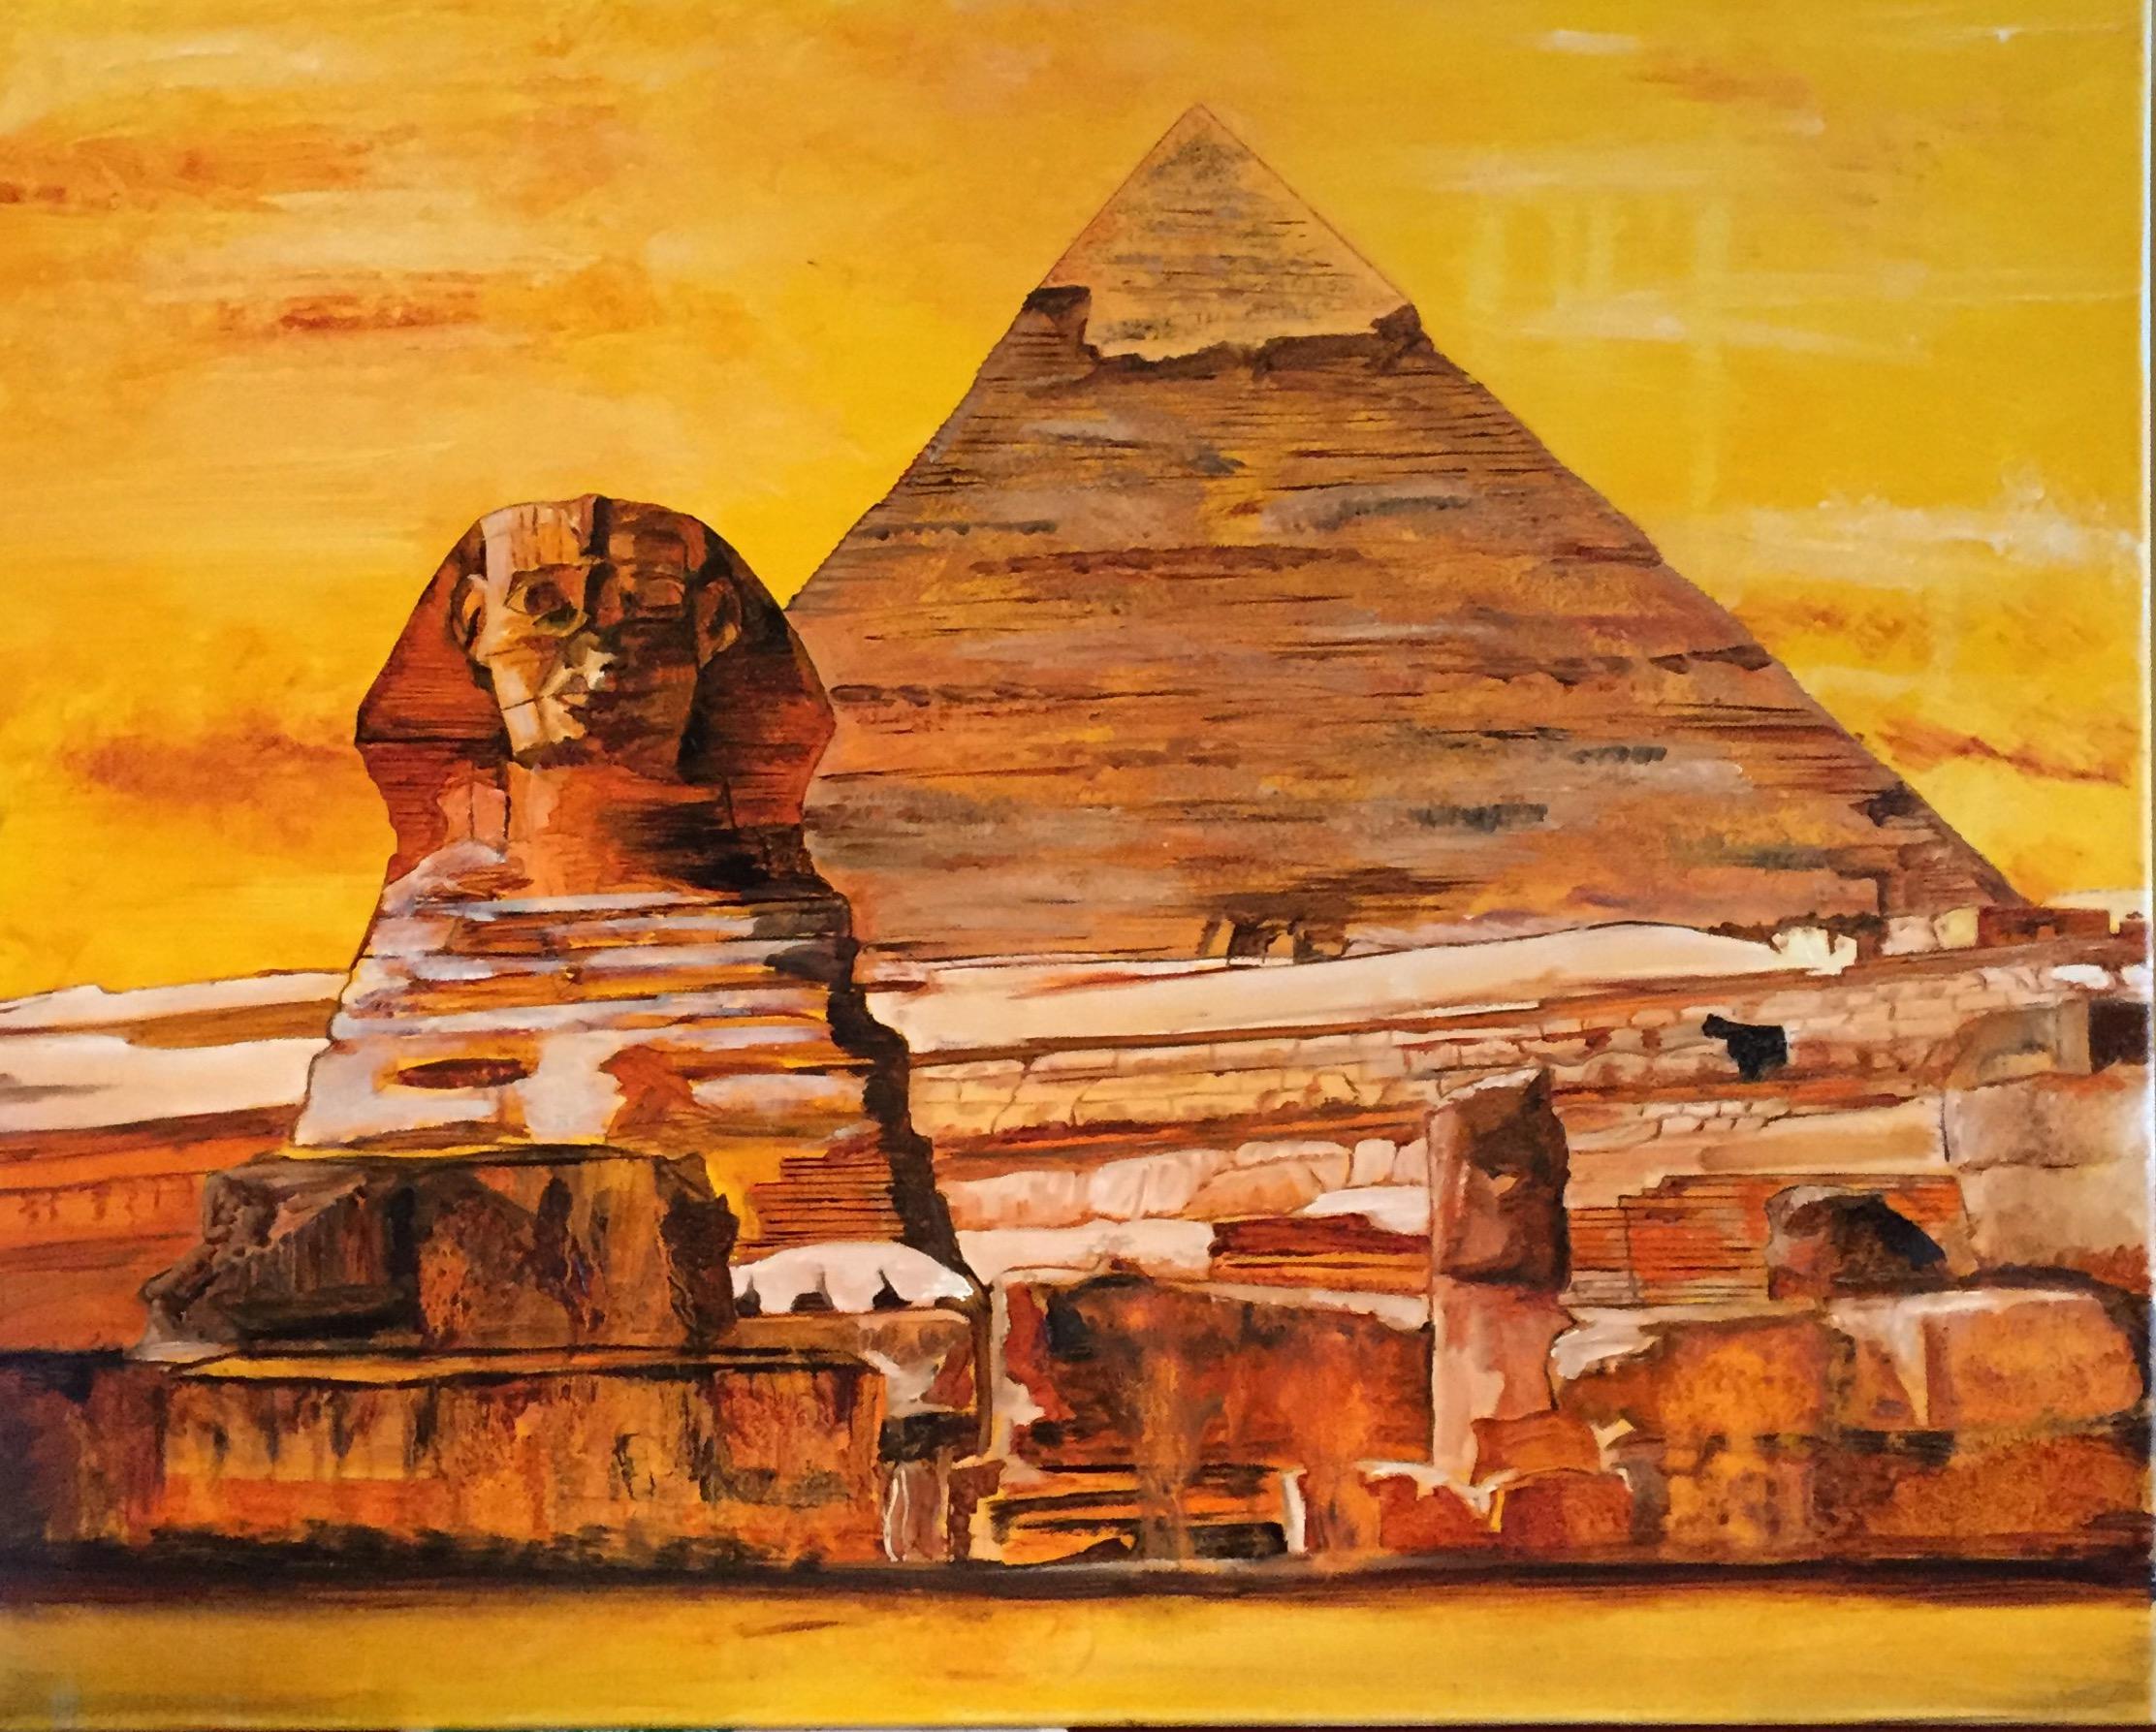 was the sphinx painted